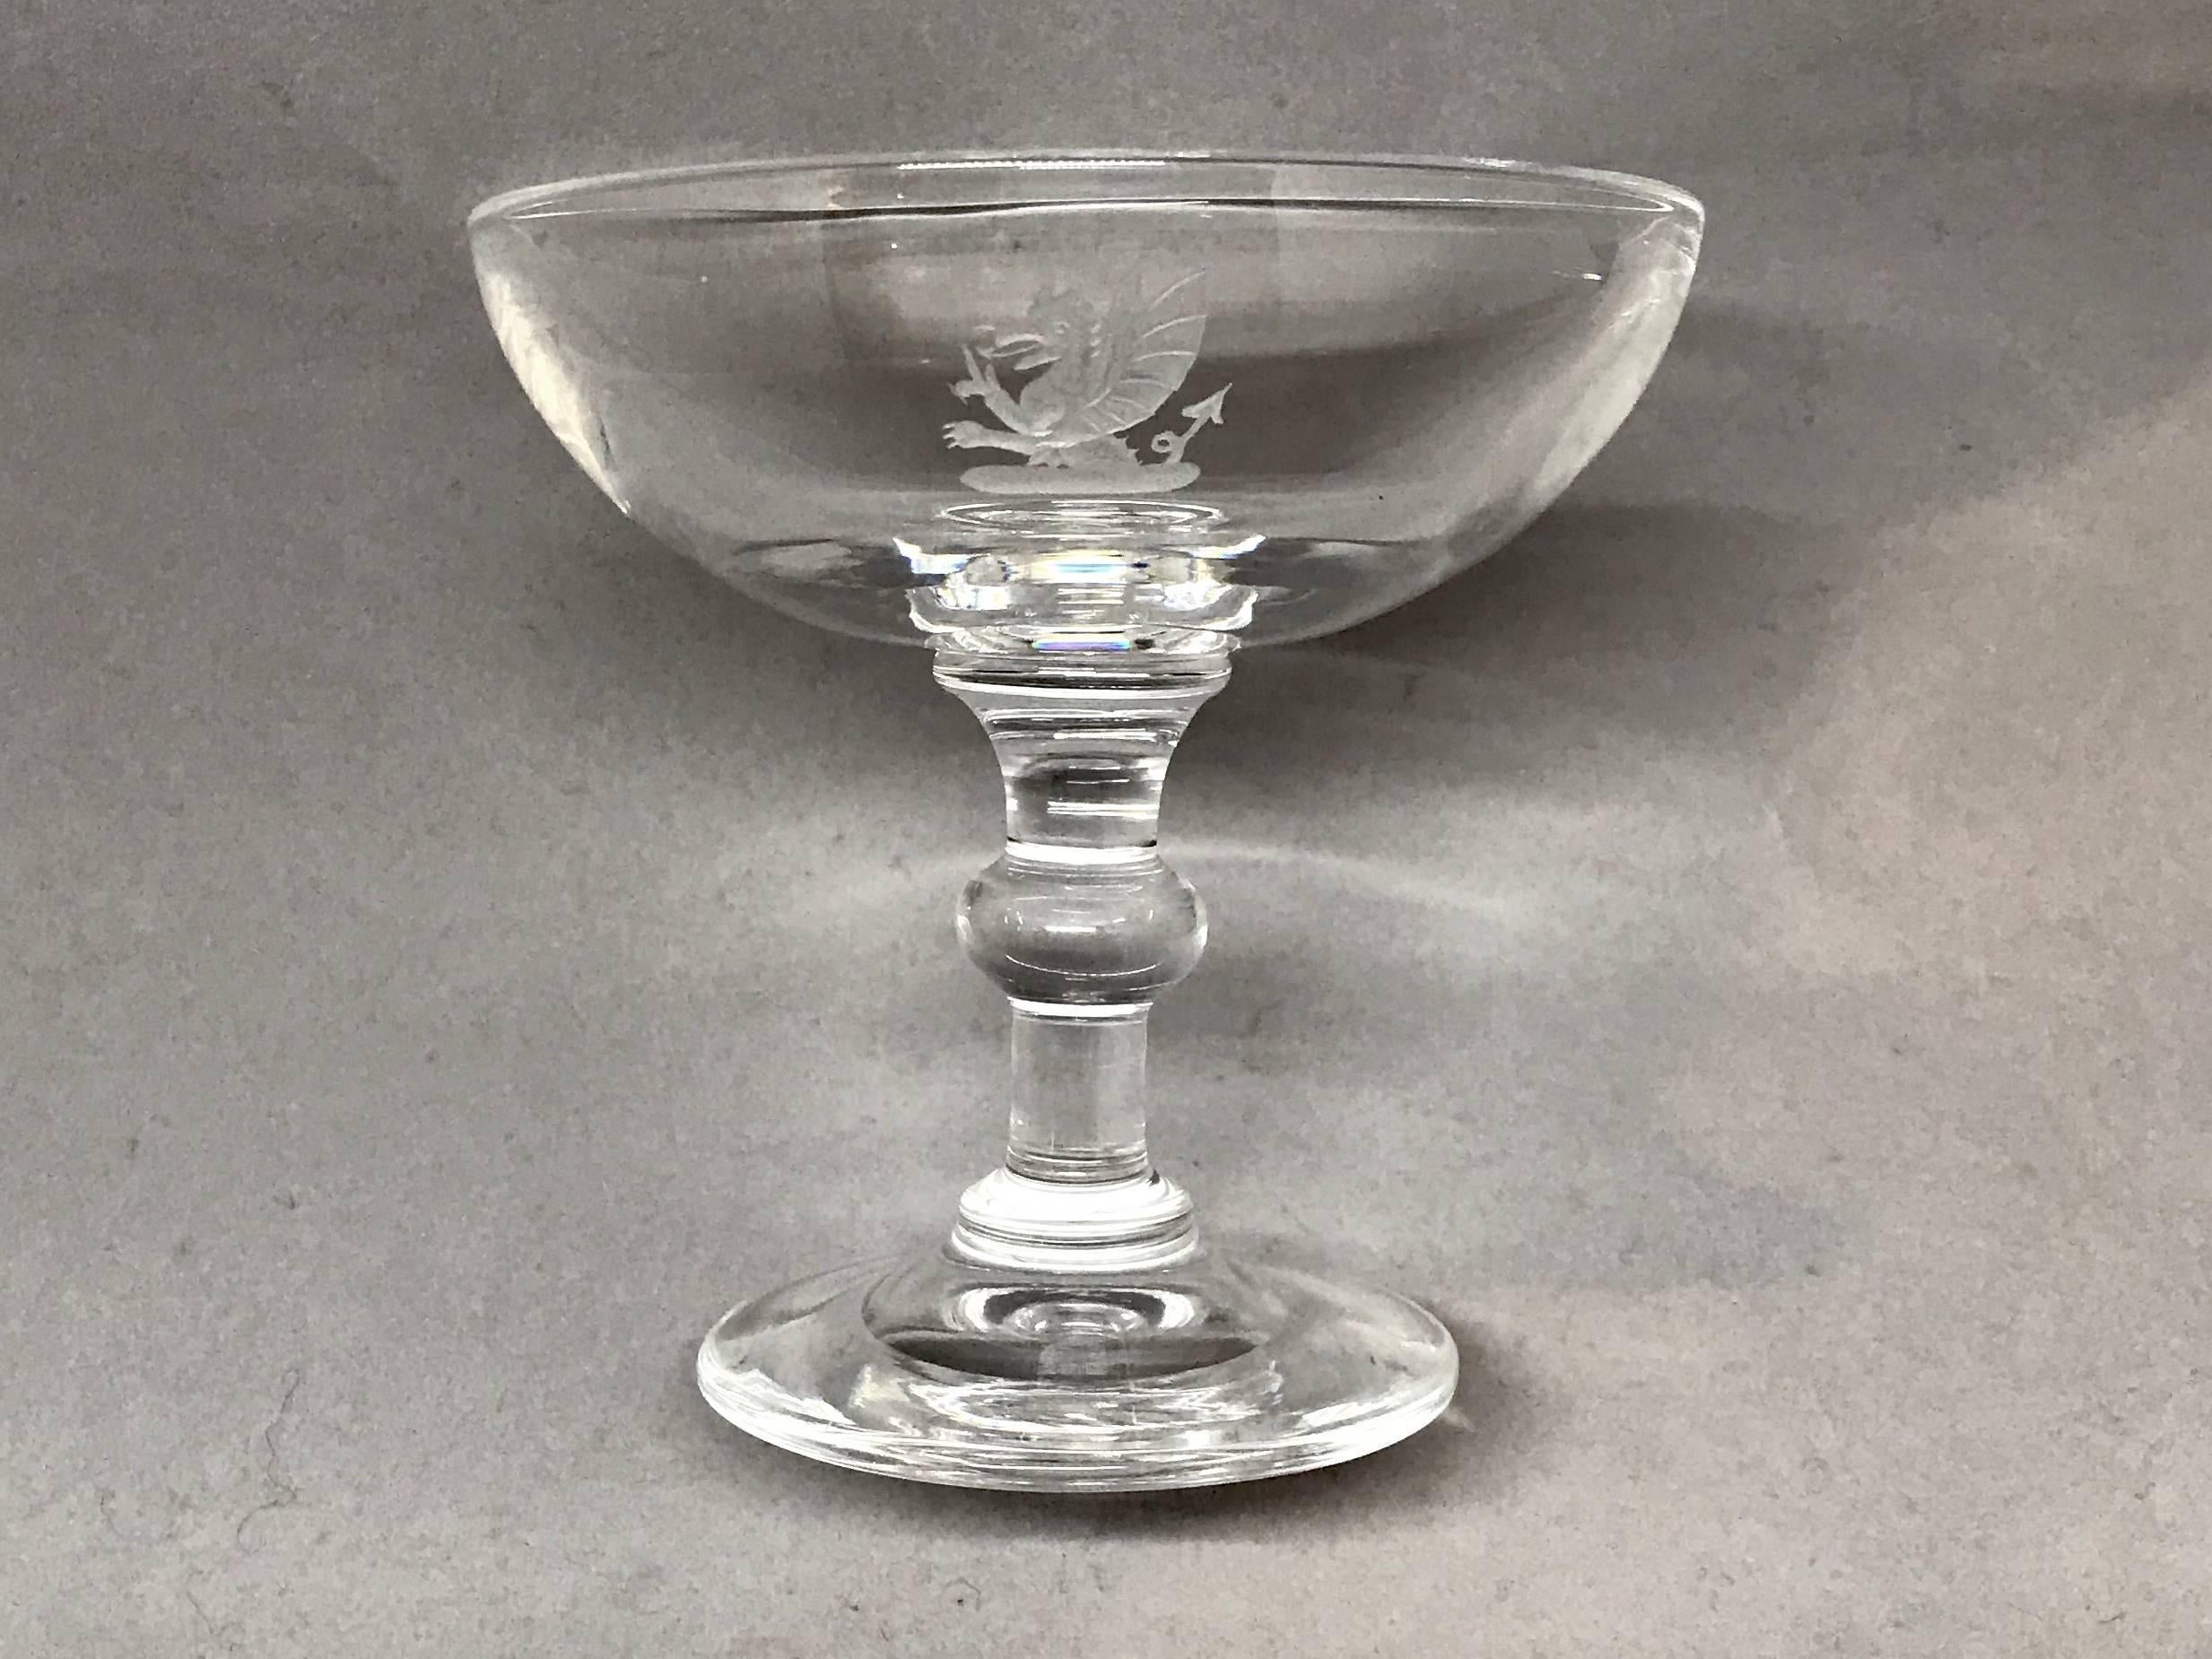 Vintage etched crystal Steuben champagne coupe. Champagne coupe with etched dragon design. Signed 